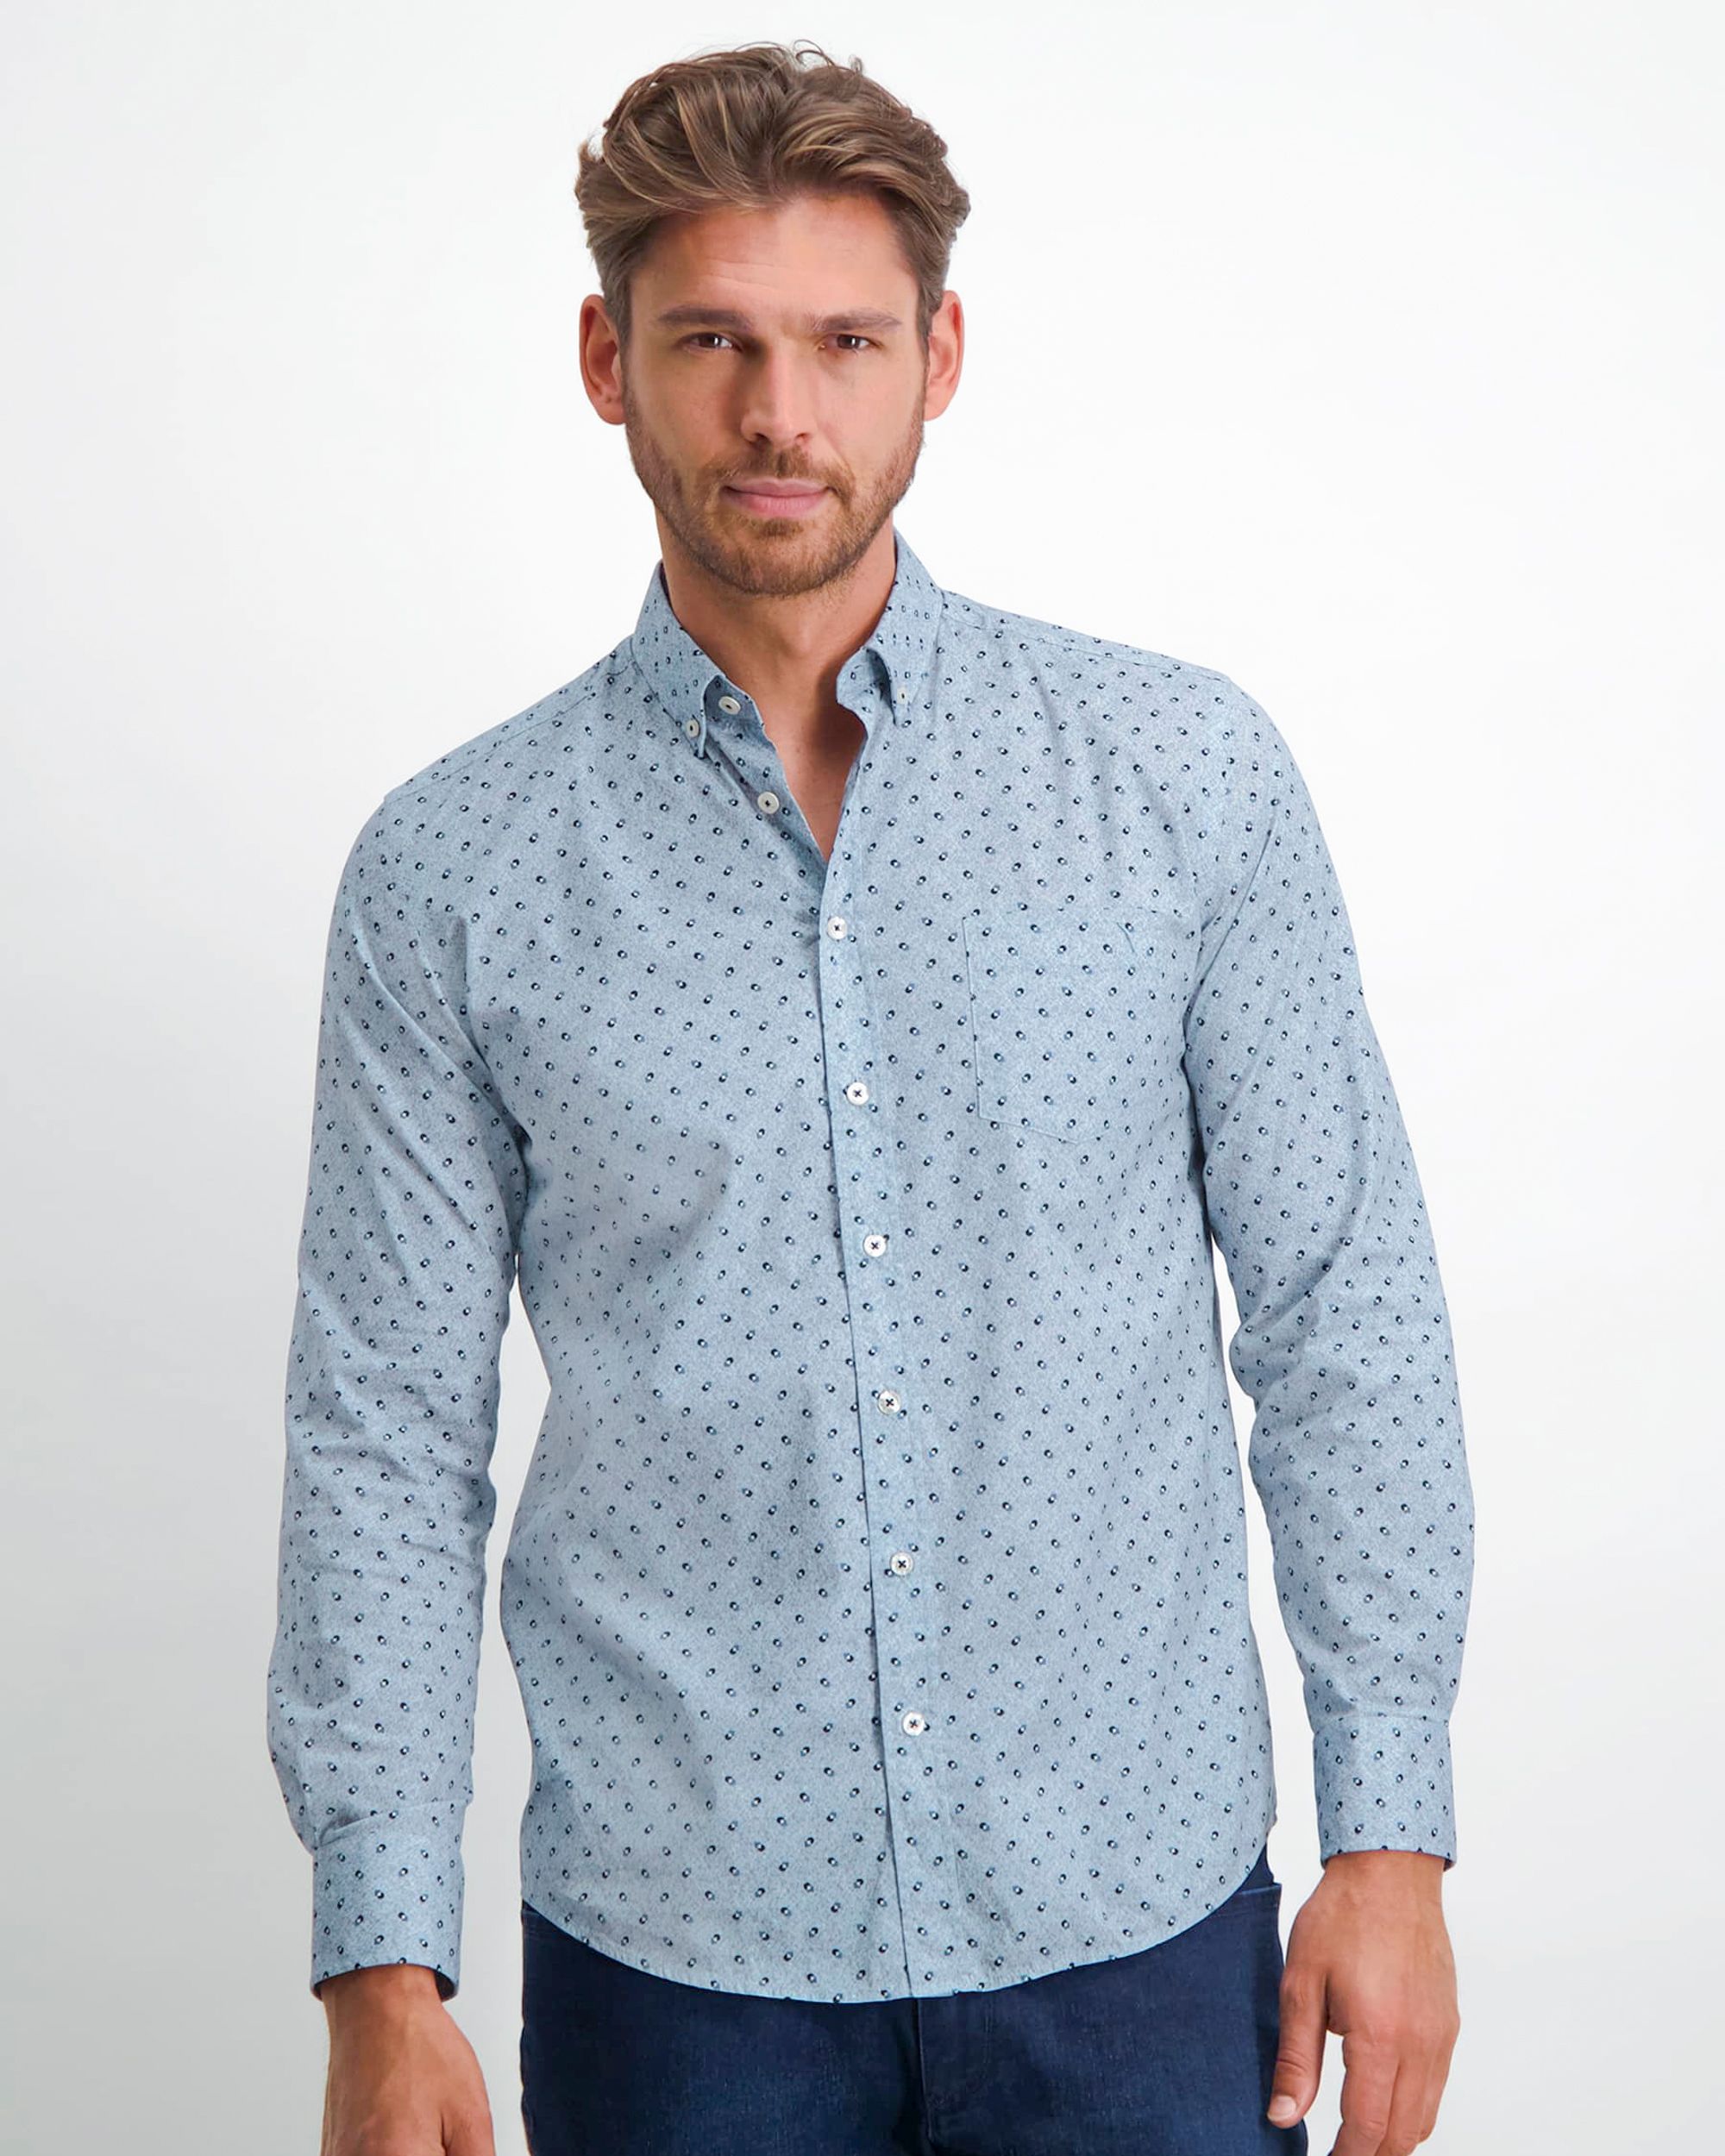 State of Art Casual Overhemd LM Donker blauw 081082-001-4XL